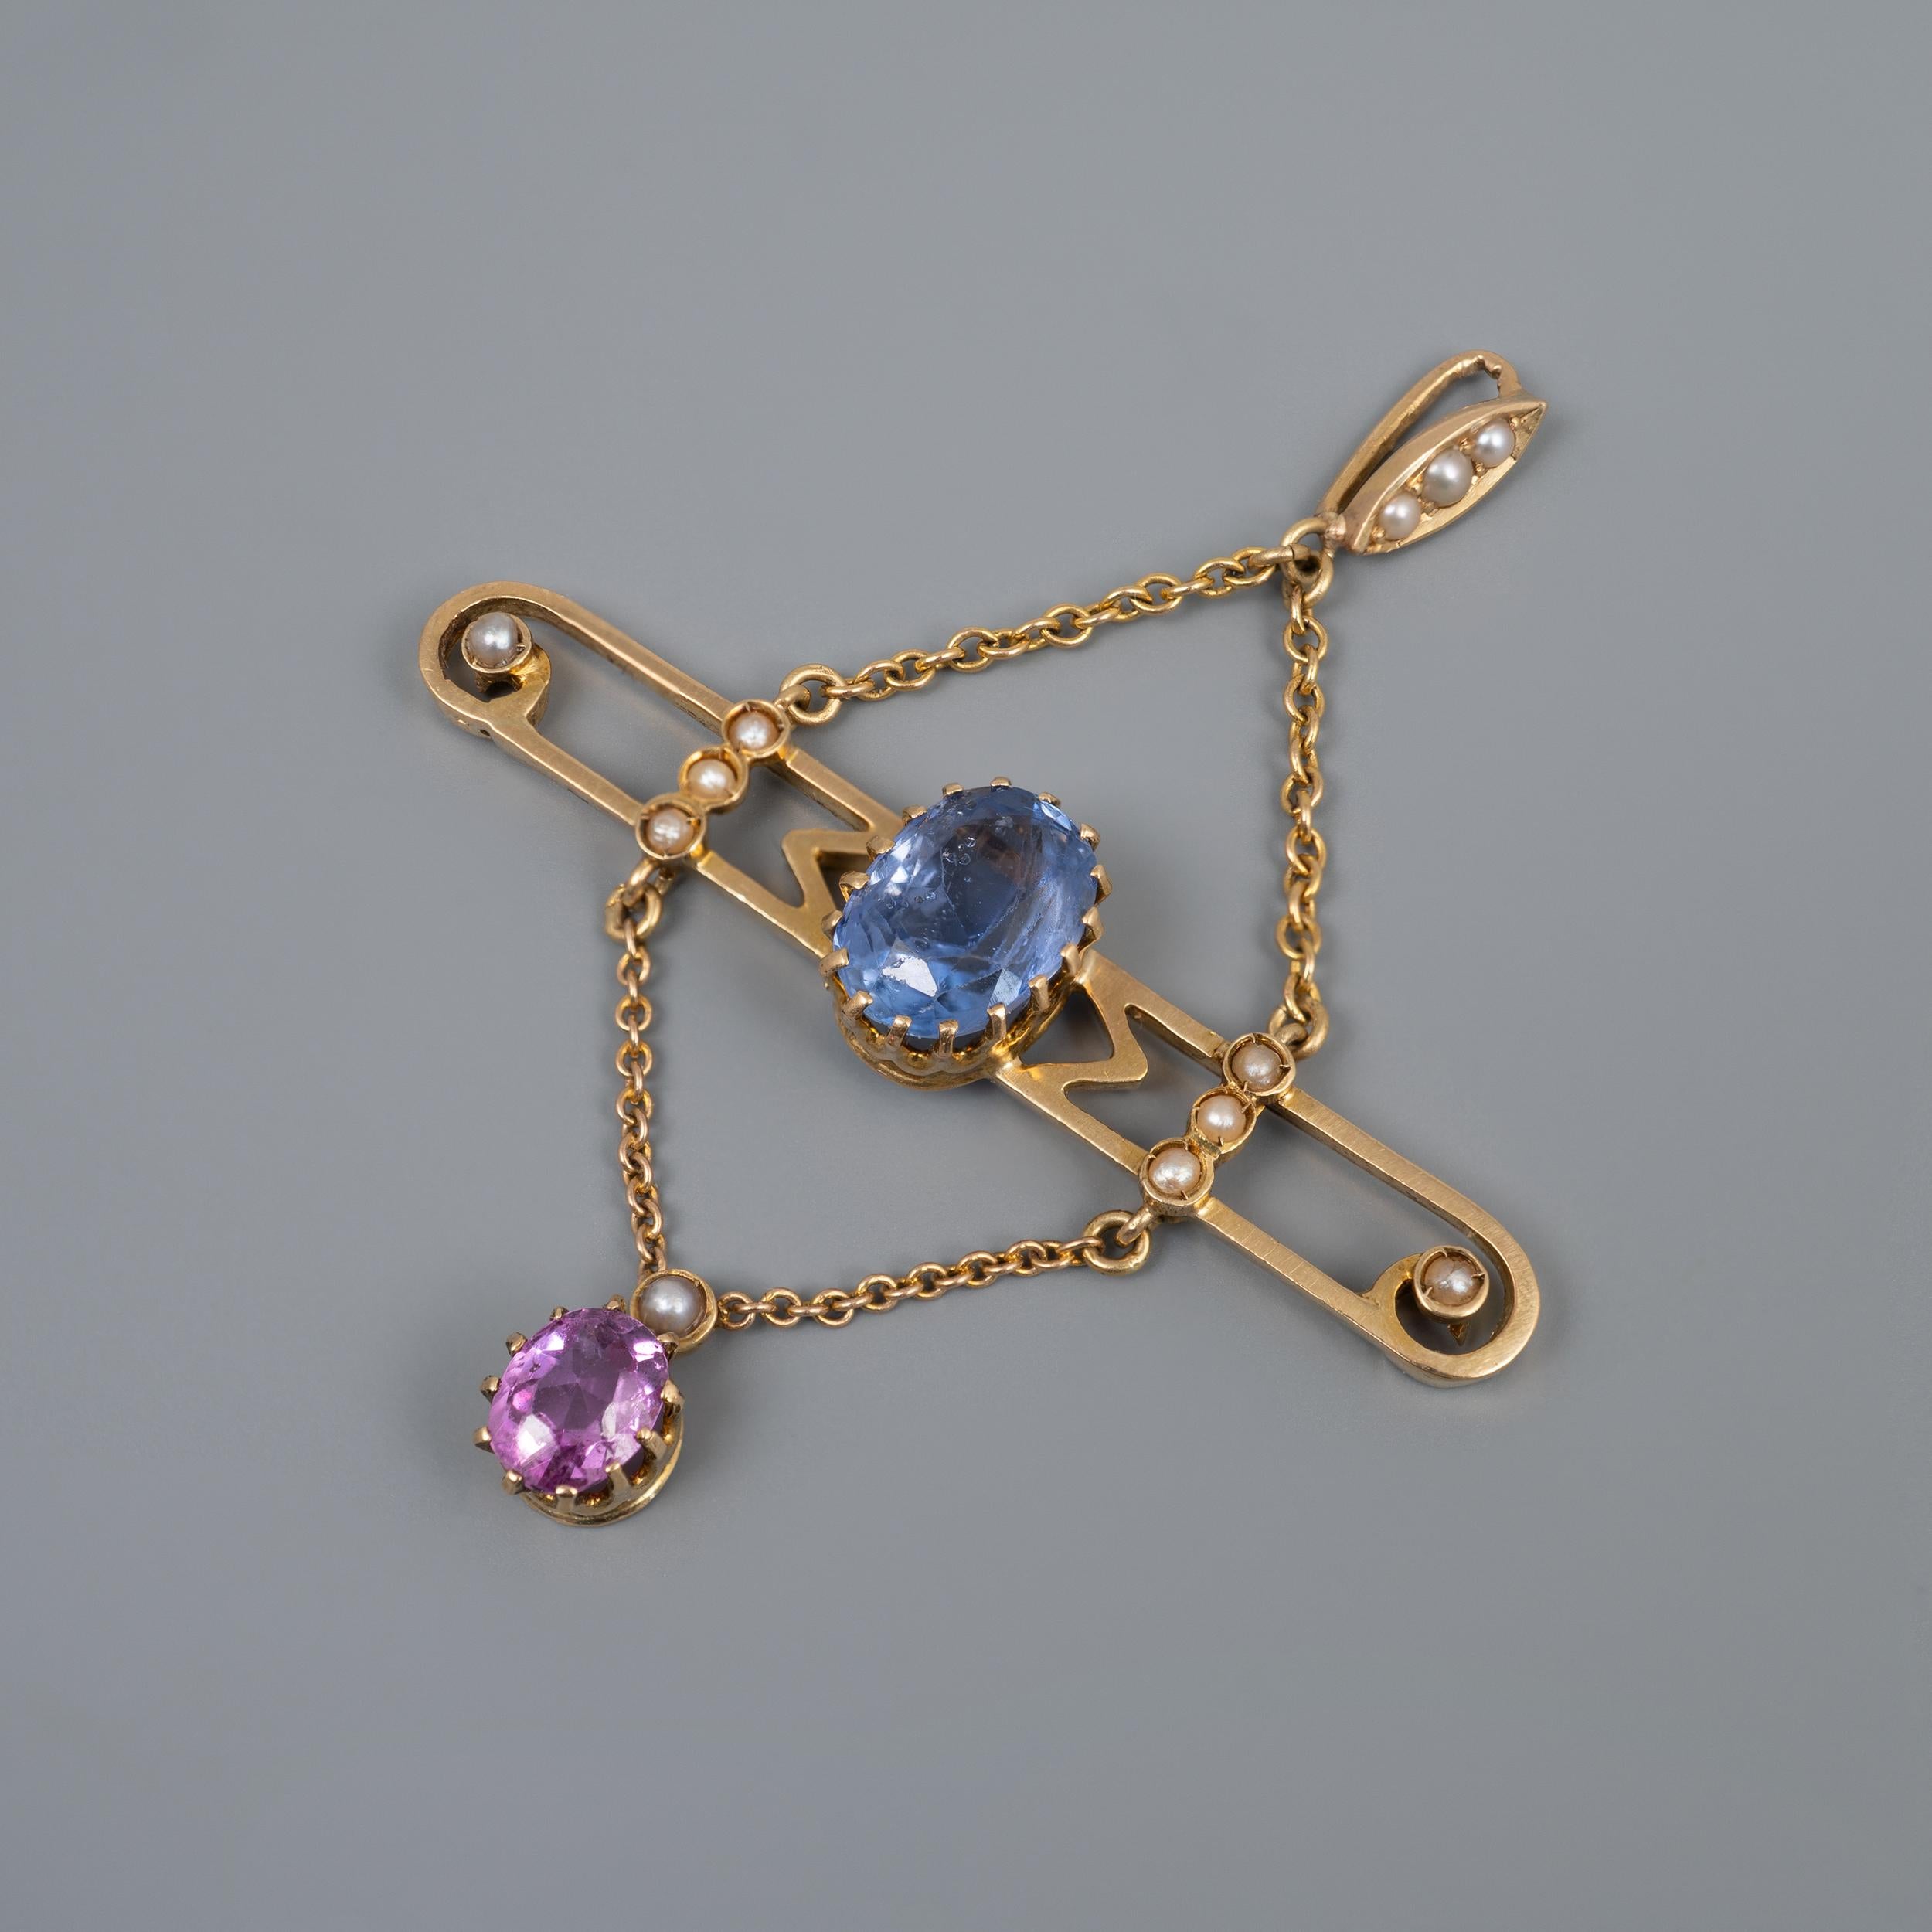 Oval Cut Art Nouveau Blue and Pink Sapphire Pearl Pendant Necklace 15 Carat Yellow Gold For Sale